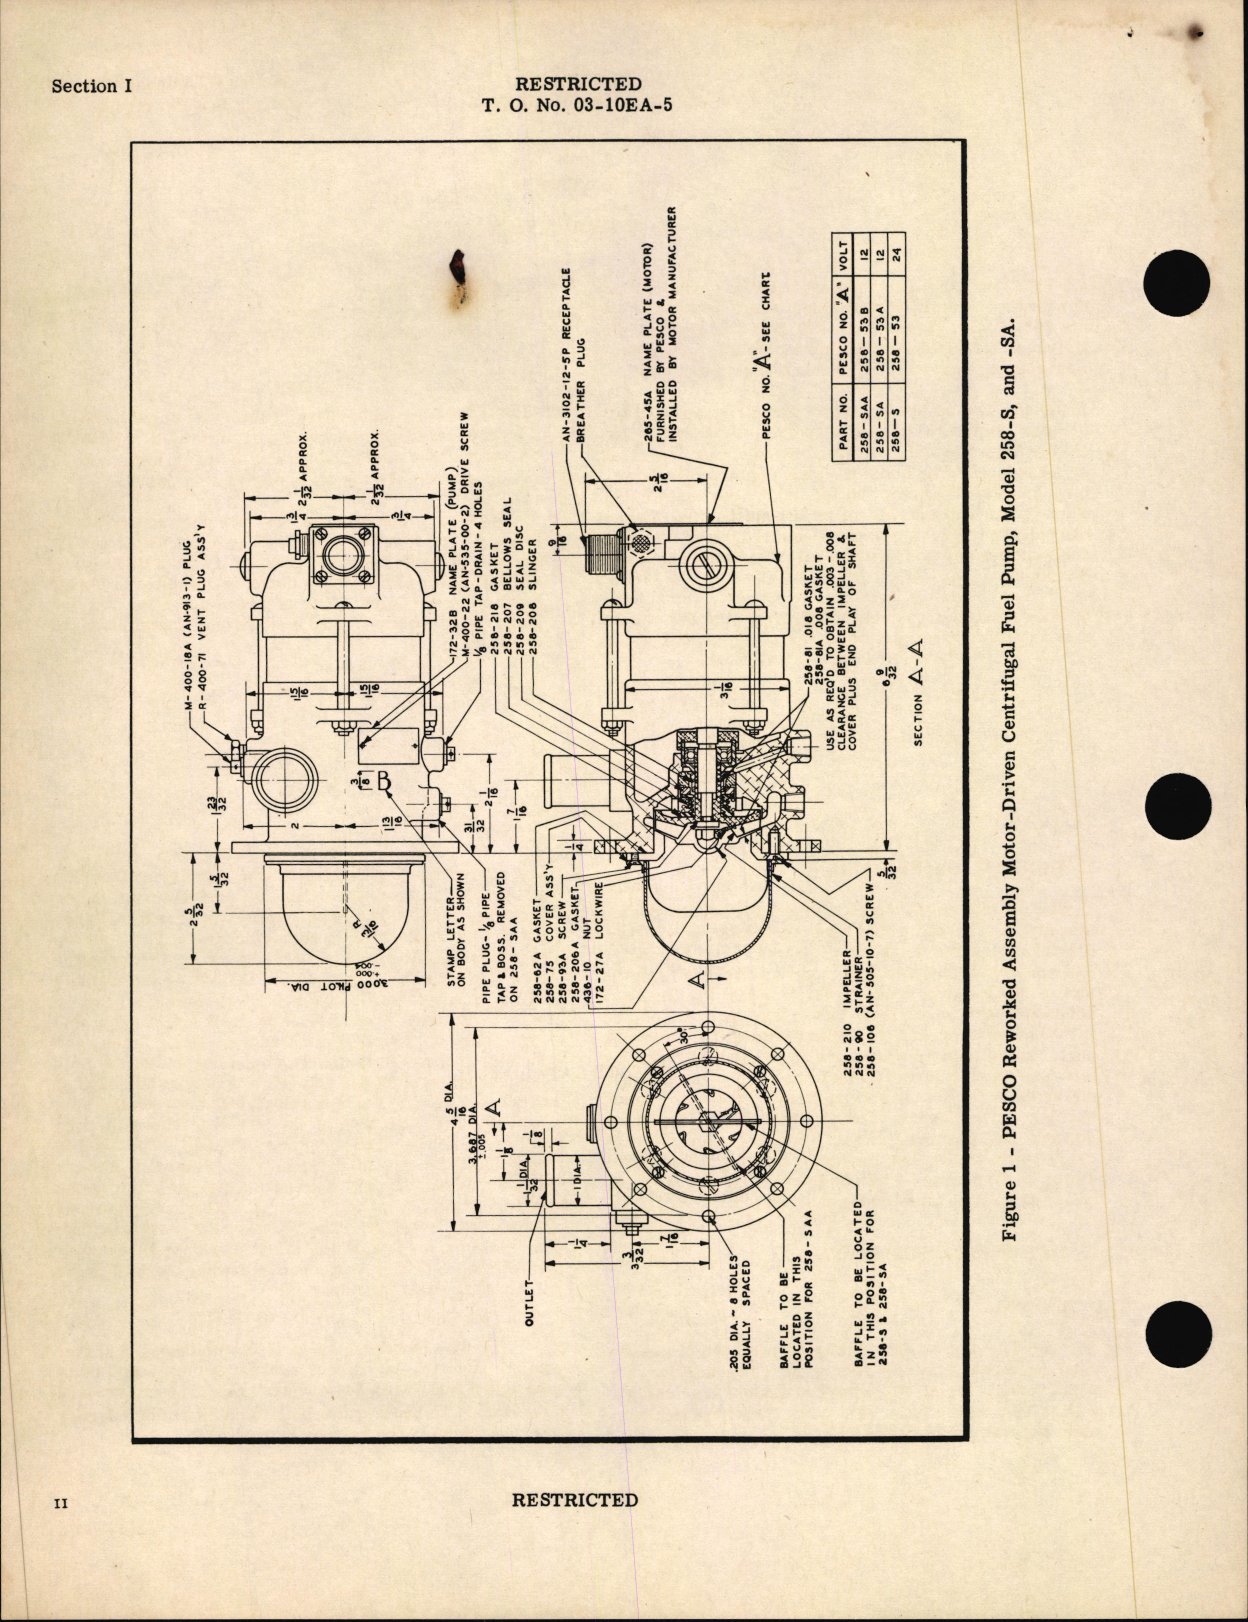 Sample page 6 from AirCorps Library document: Handbook of Instructions with Parts List for Centrifugal Fuel Pump Model 258 Series